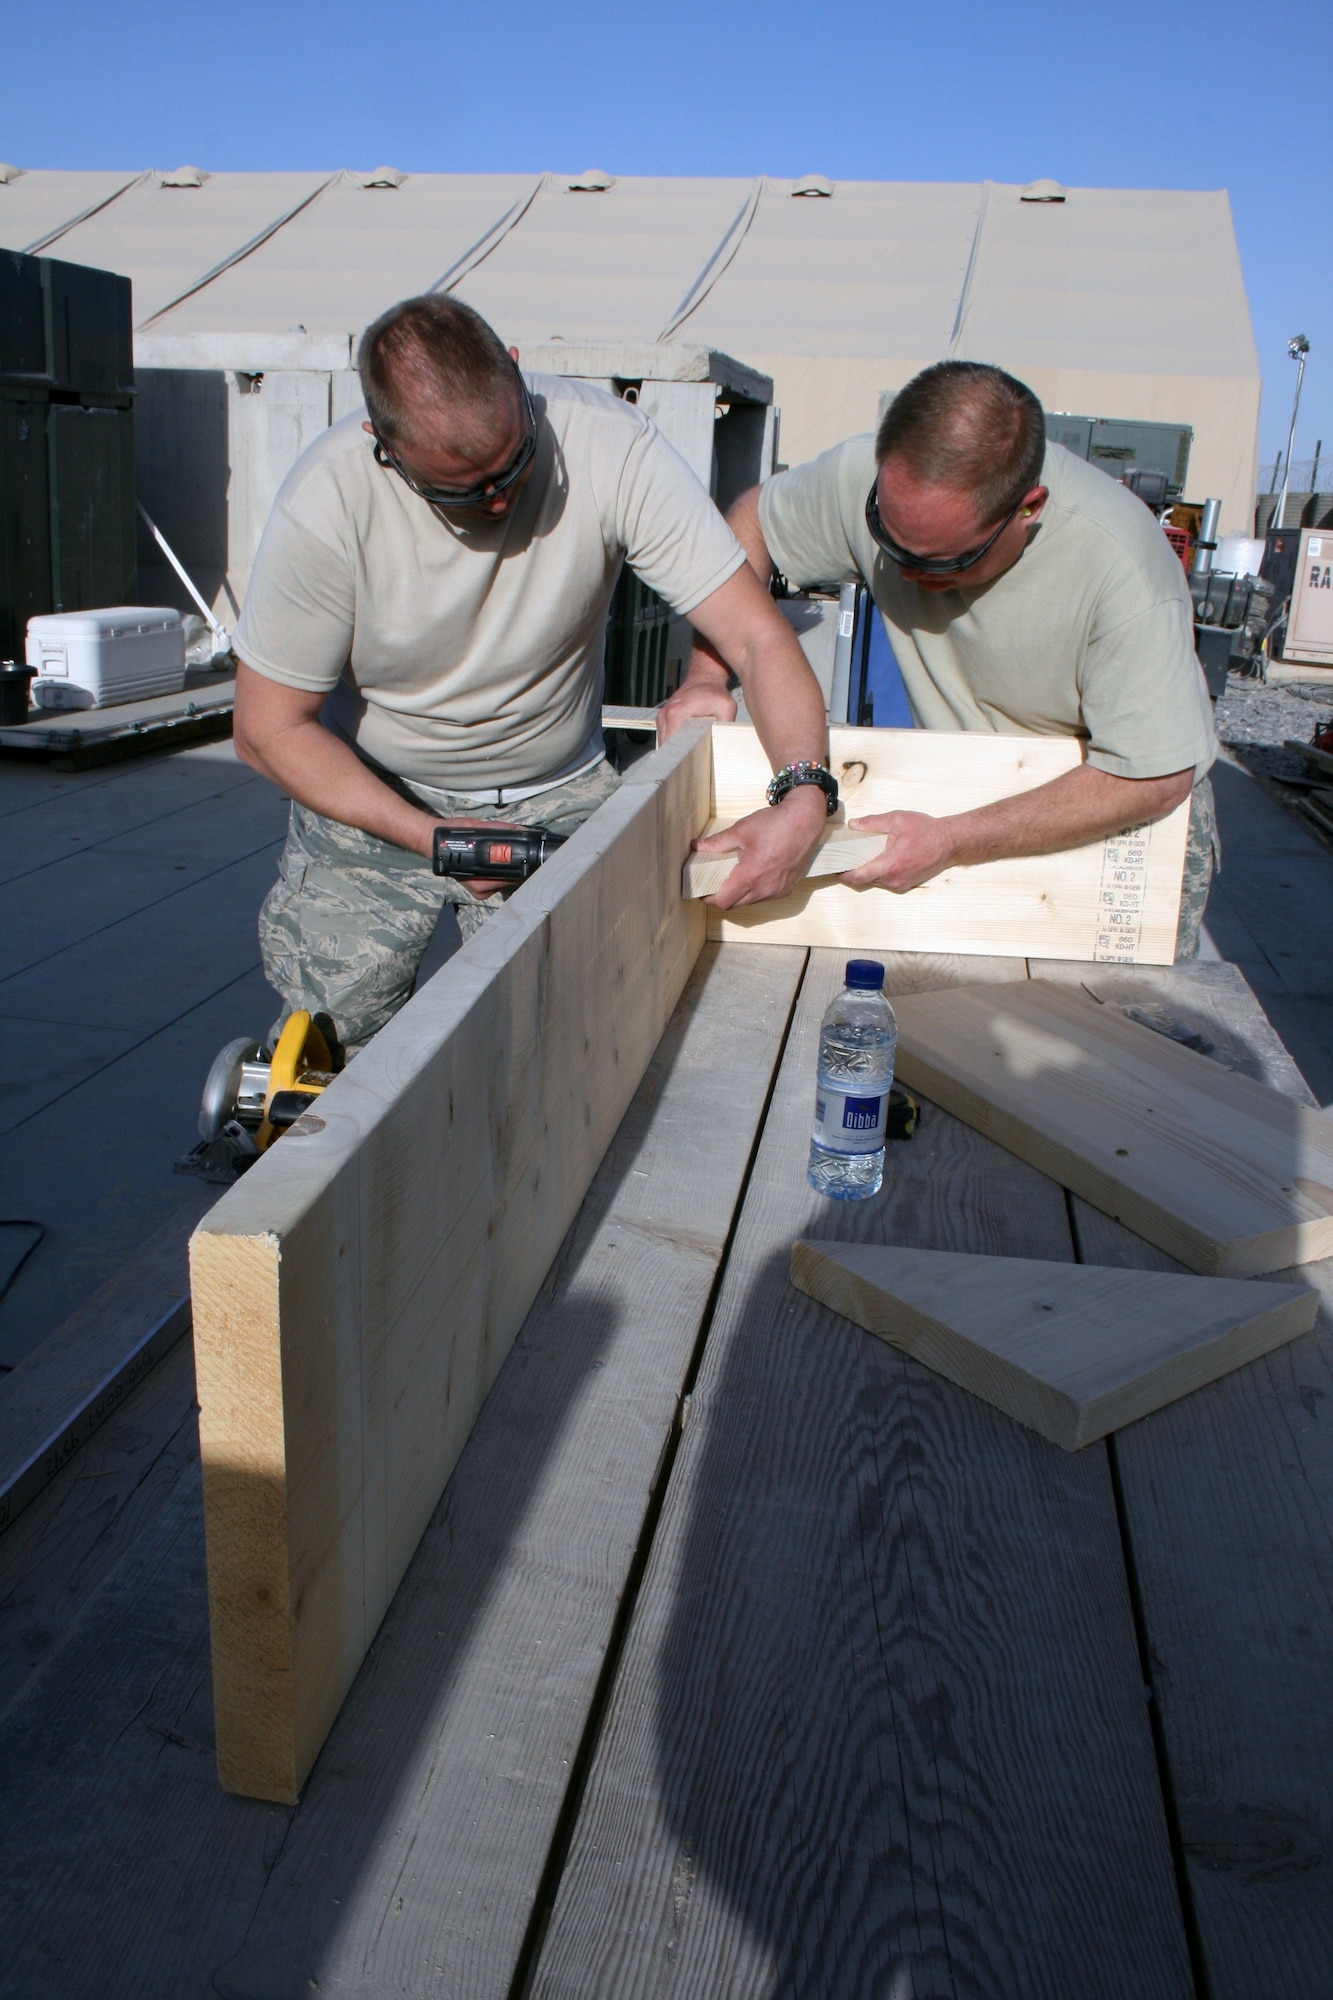 Two Airmen from the 451st Air Expeditionary Wing construct a bench at Kandahar Airfield, Afghanistan. Maintenance troops built tents, work tables and benches for use in doing the paperwork associated with maintaining their assigned aircraft, the A-10C. The Airmen are deployed from the Maryland Air National Guard in Baltimore. (U.S. Air Force photo by Tech. Sgt. David Speicher/Released)